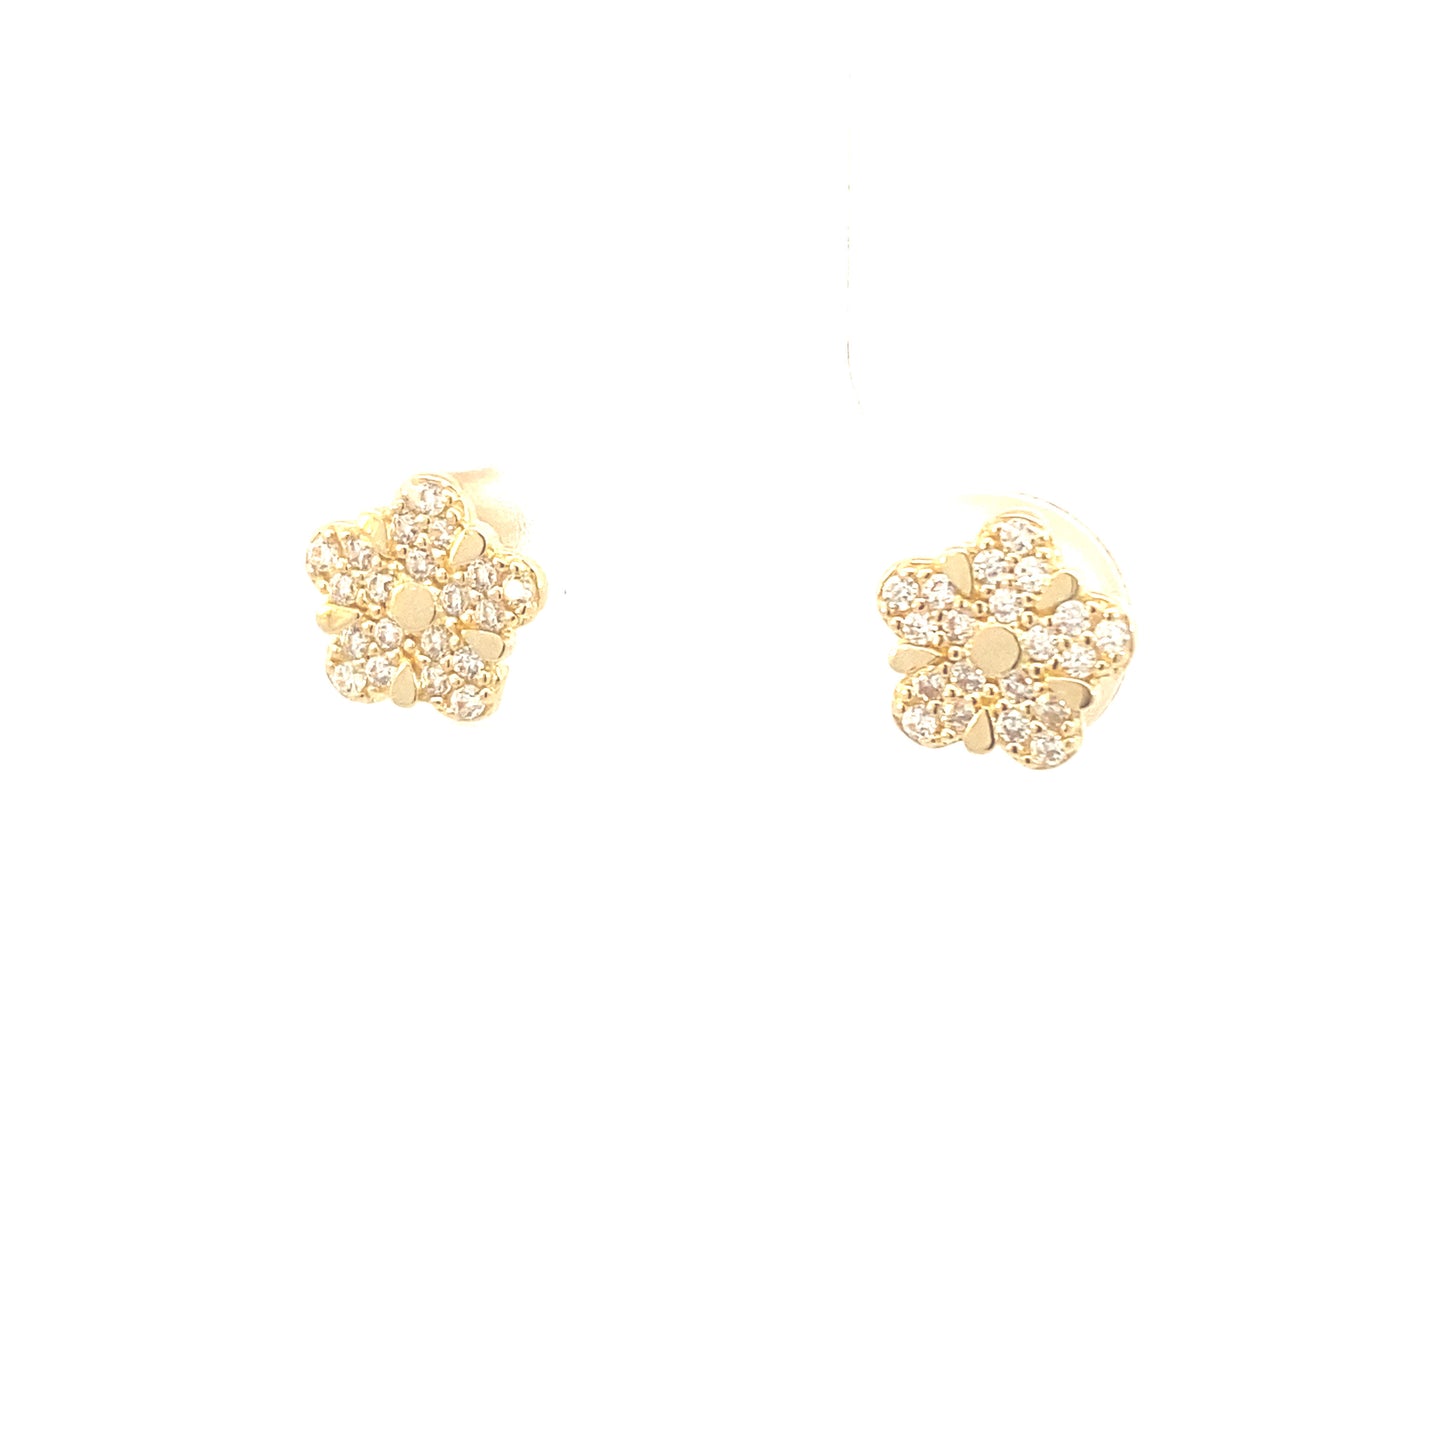 14K Gold Flower Studs Earrings | Luby Gold Collection | Luby 